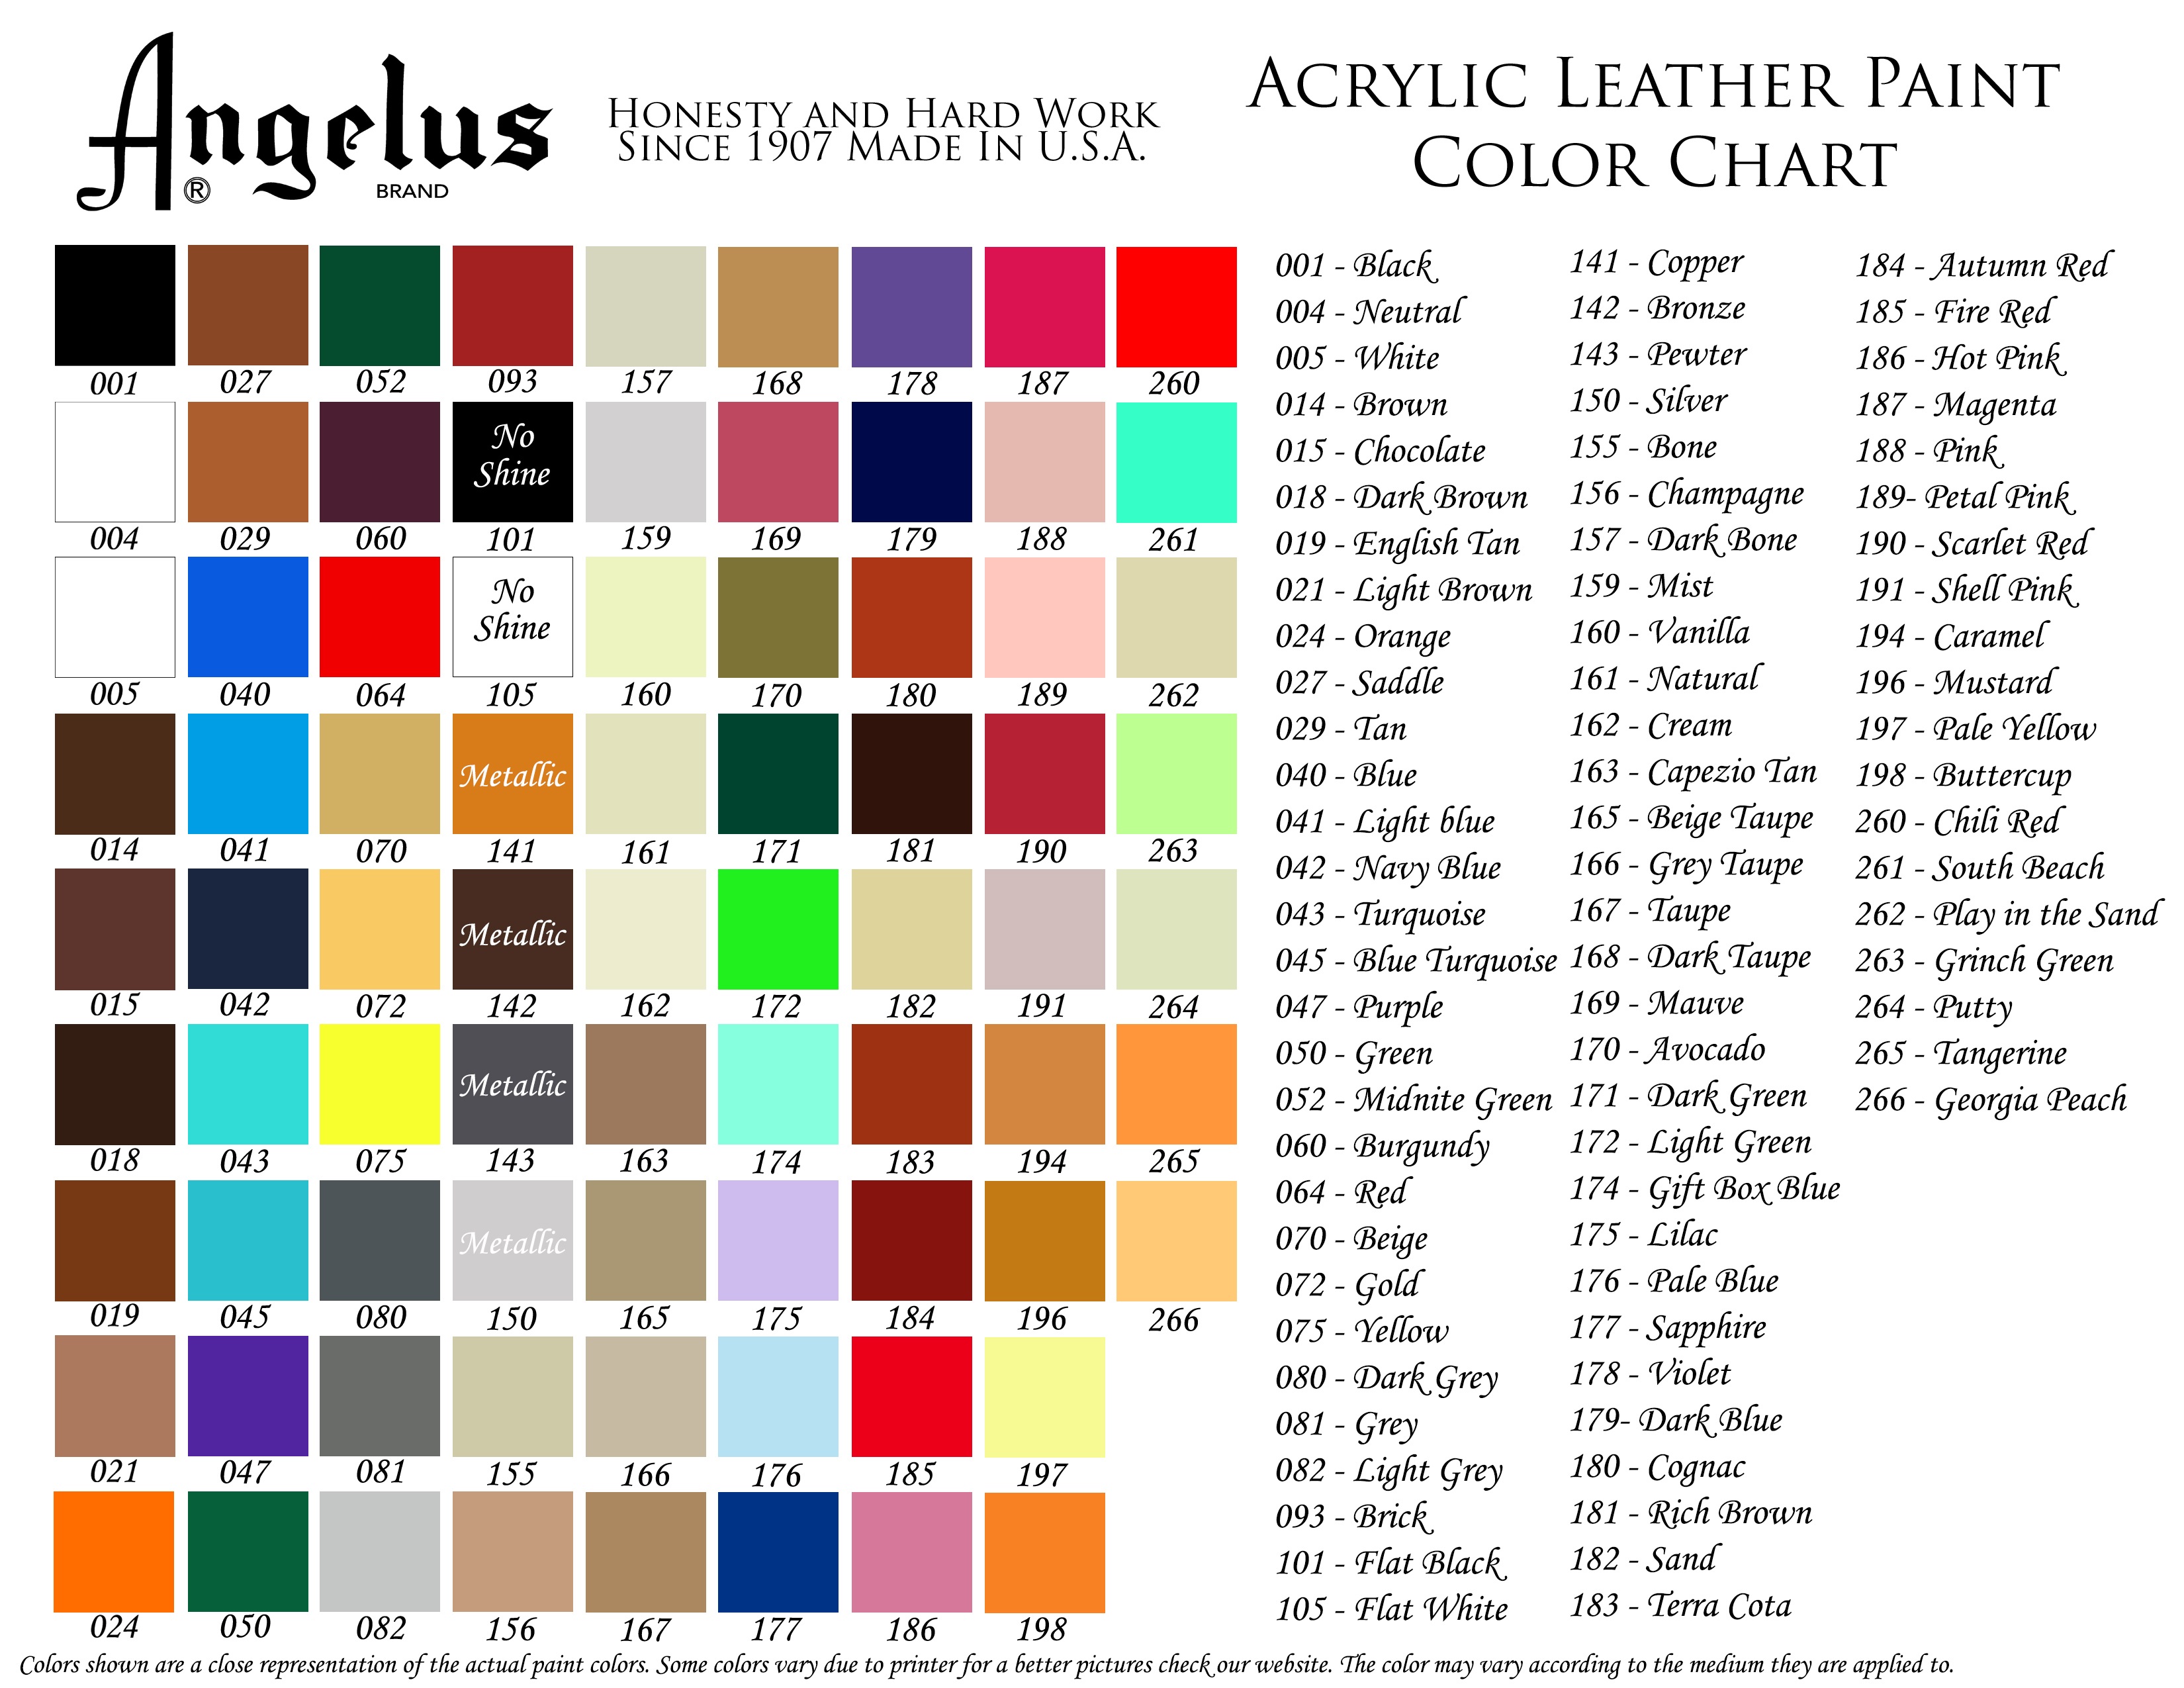 angelus acrylic leather paint color chart